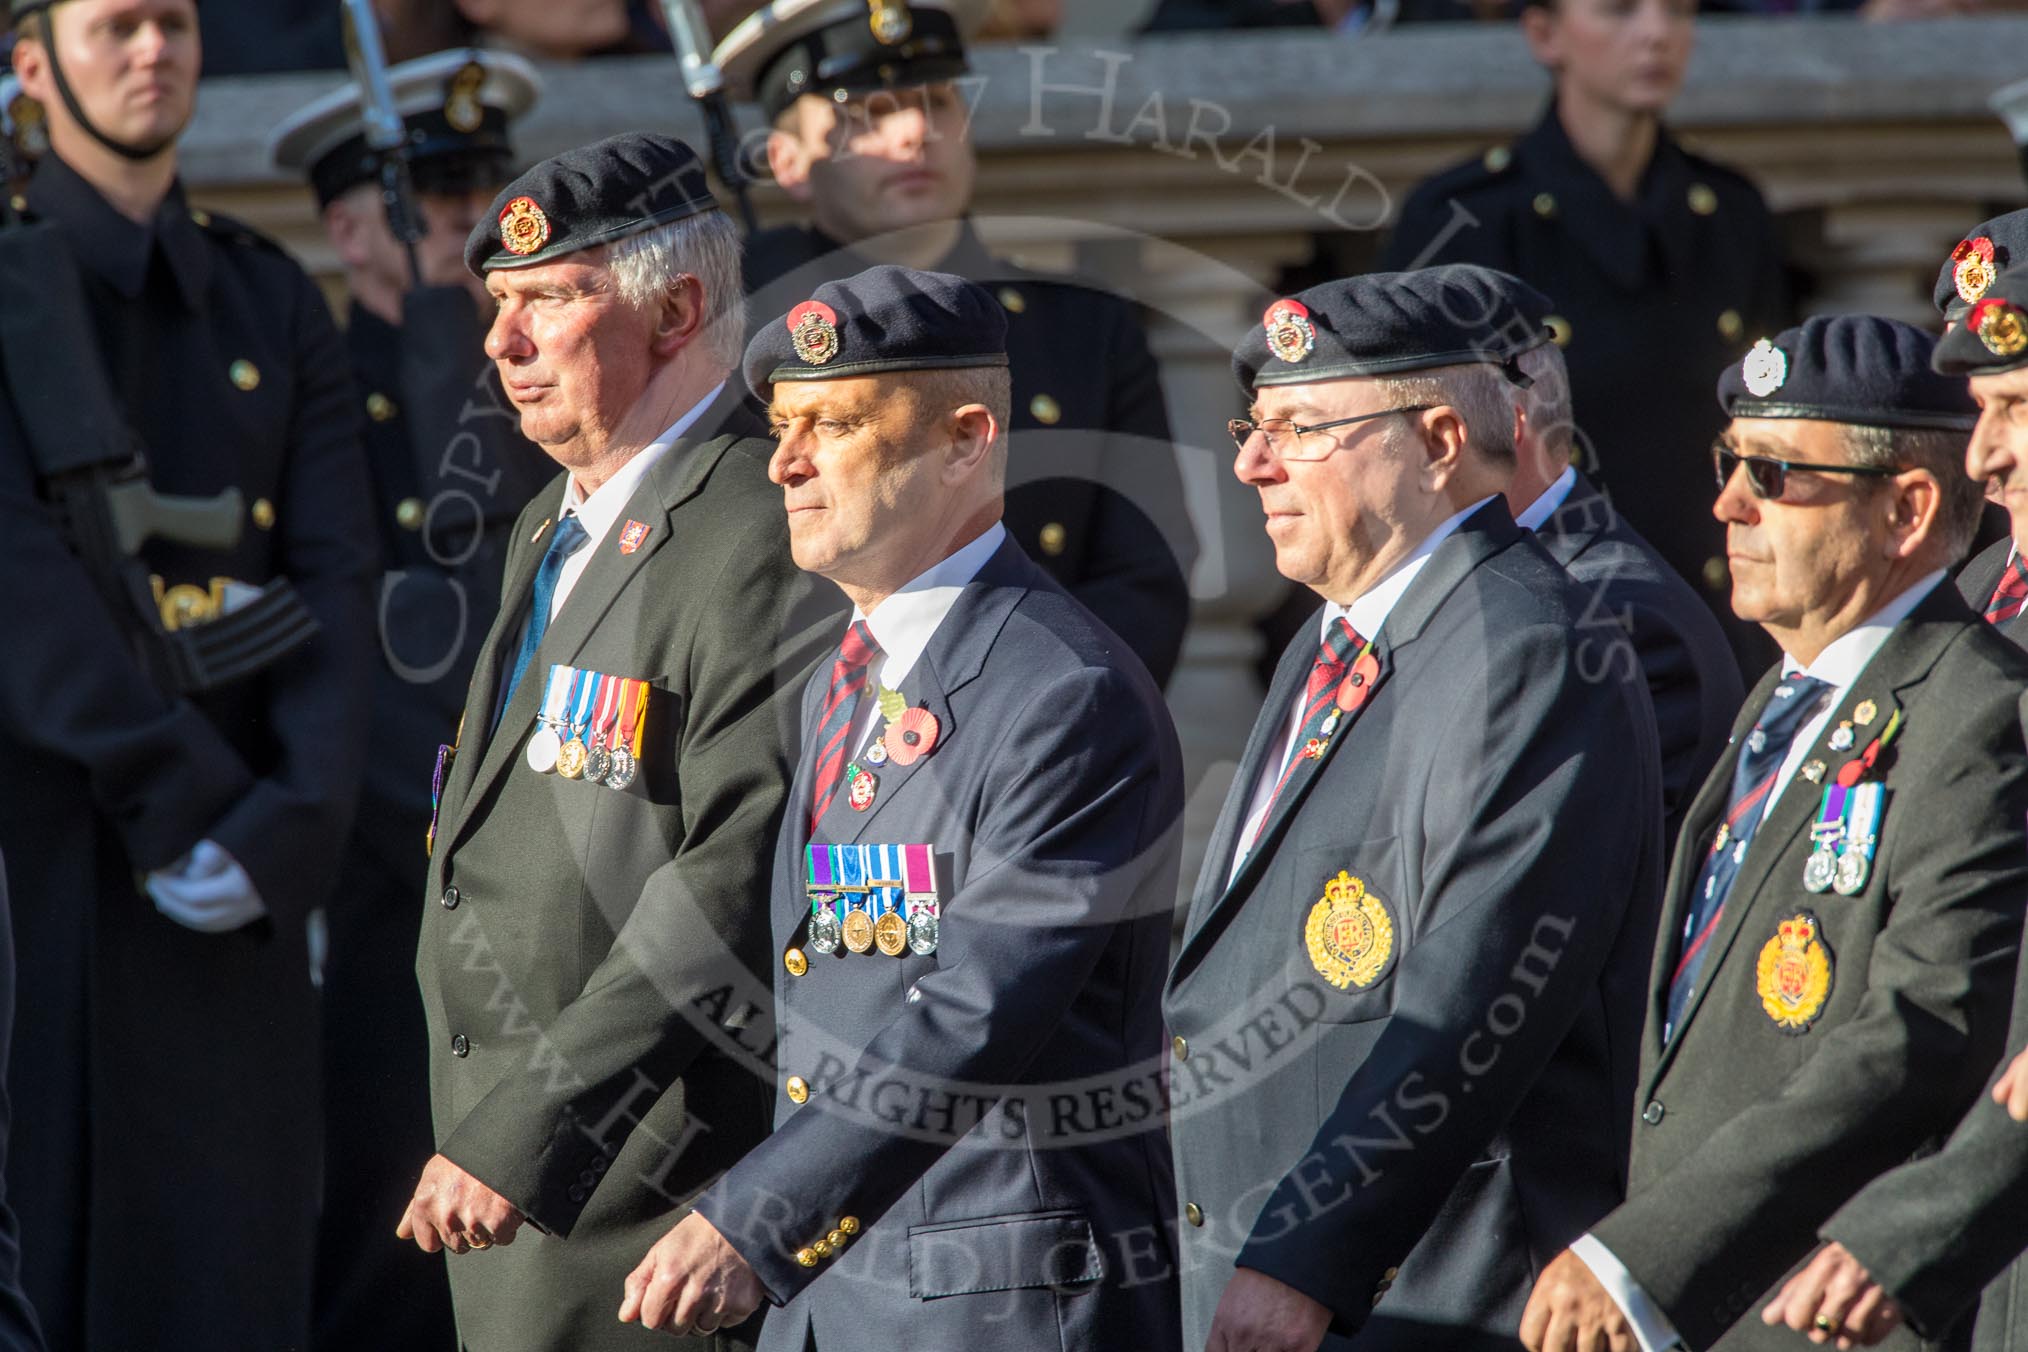 50 FD SQN (CONST) Royal Engineers (Group B30, 35 members) during the Royal British Legion March Past on Remembrance Sunday at the Cenotaph, Whitehall, Westminster, London, 11 November 2018, 12:12.